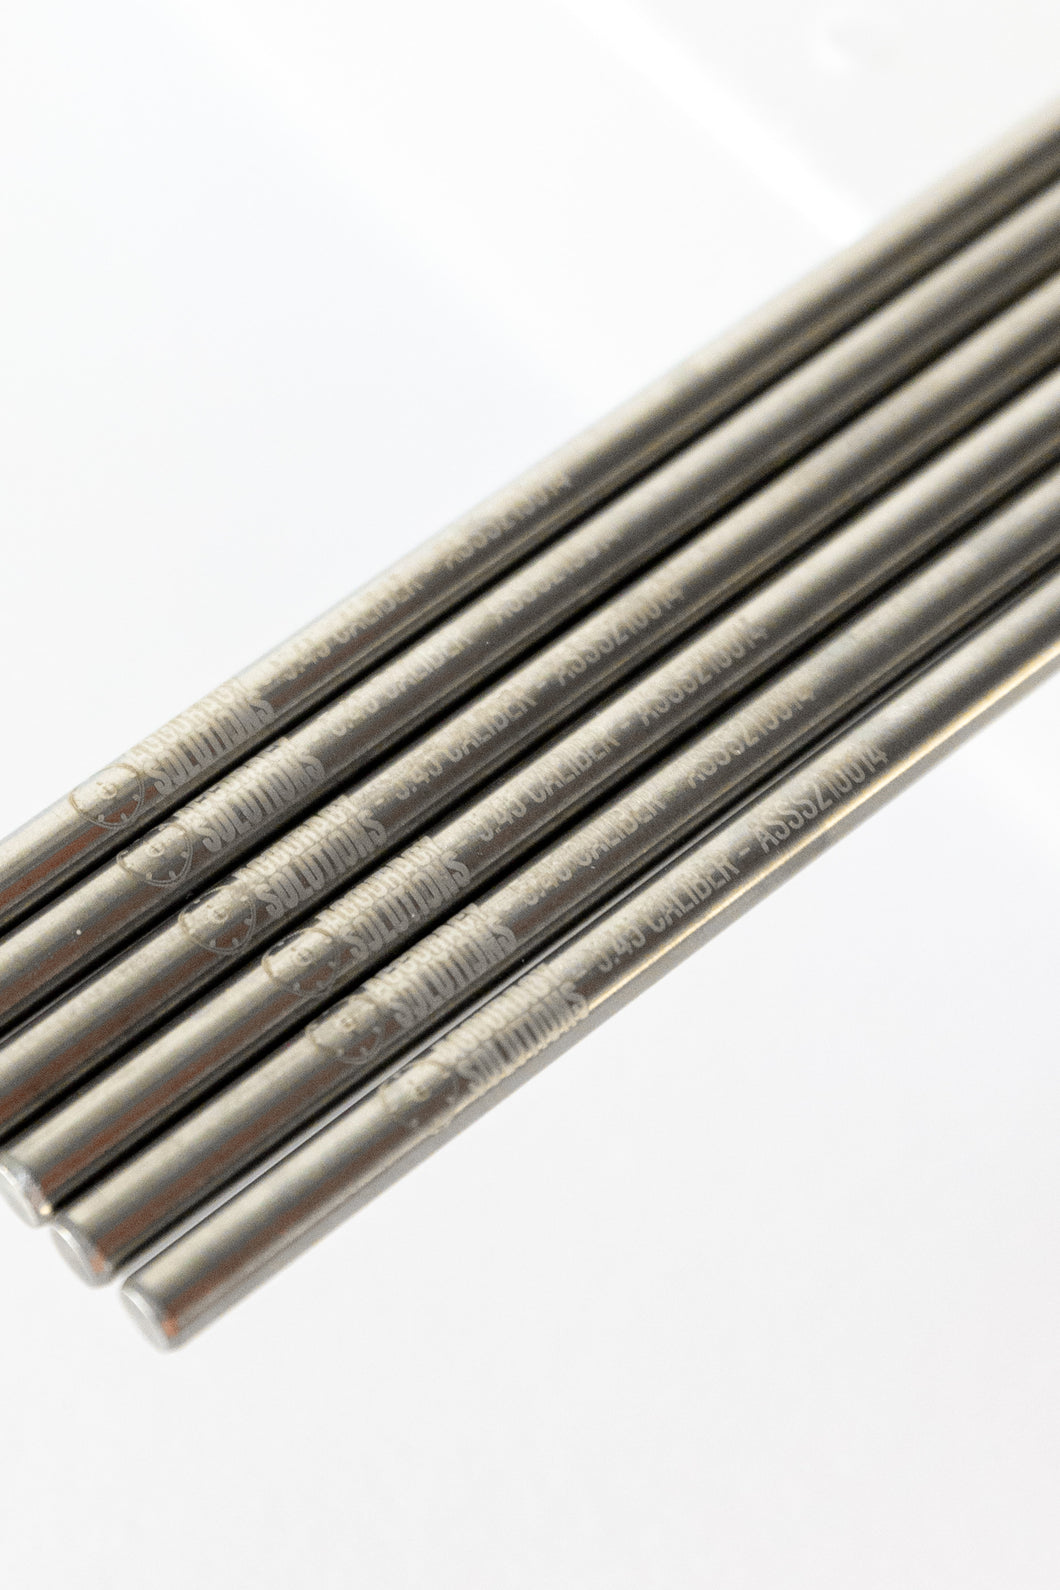 5.45MM Stainless Steel Bore Alignment Rod